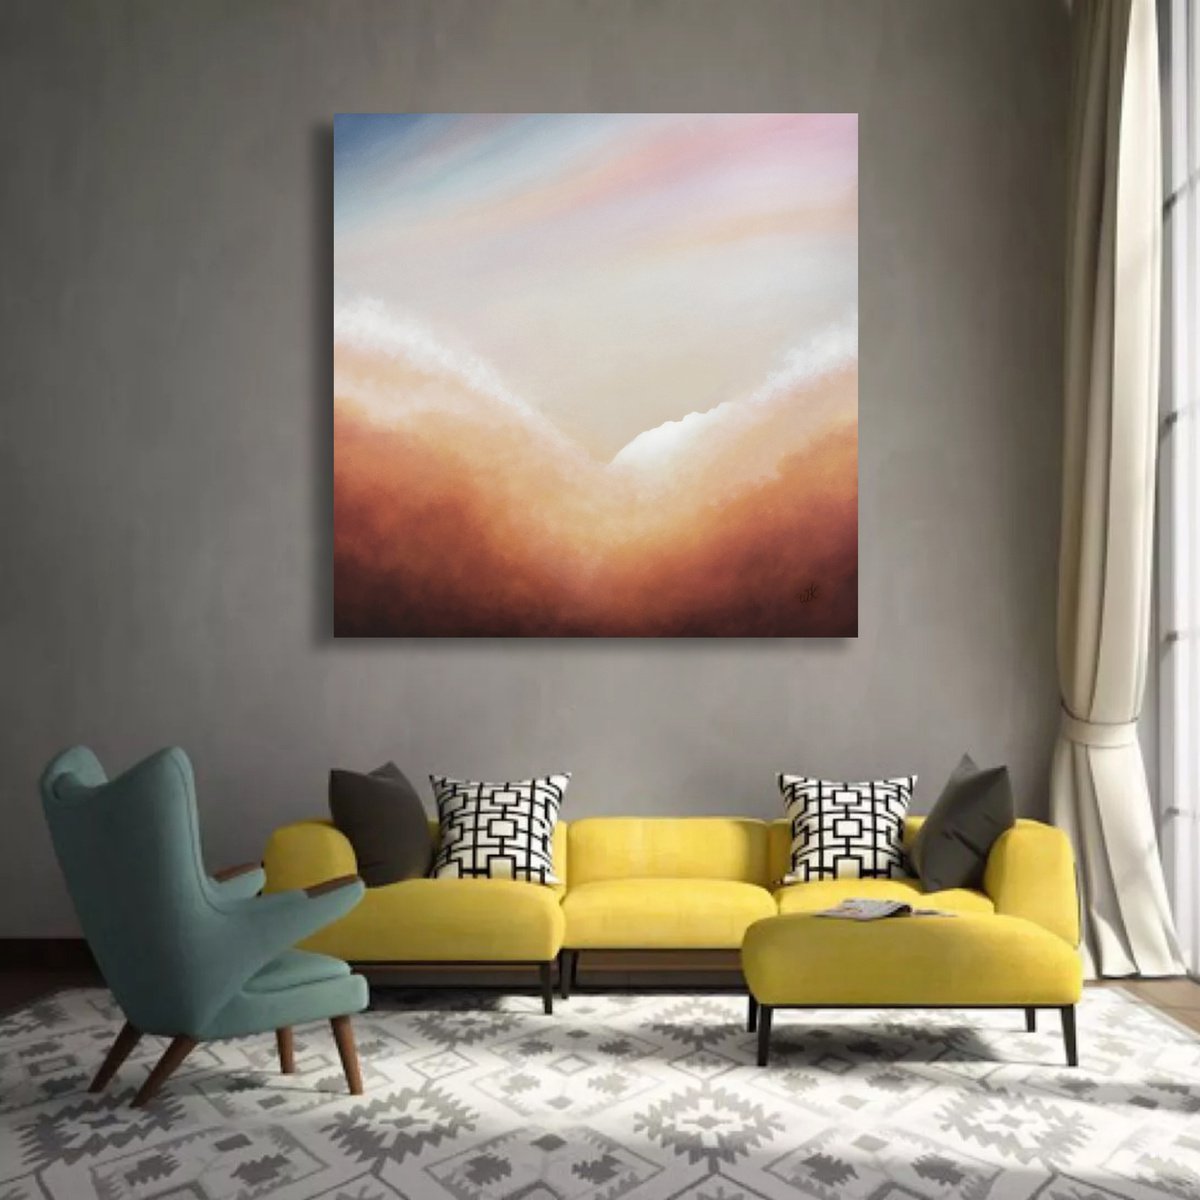 Large Abstract Landscape 02 - Oil Painting on Canvas 100×100 cm